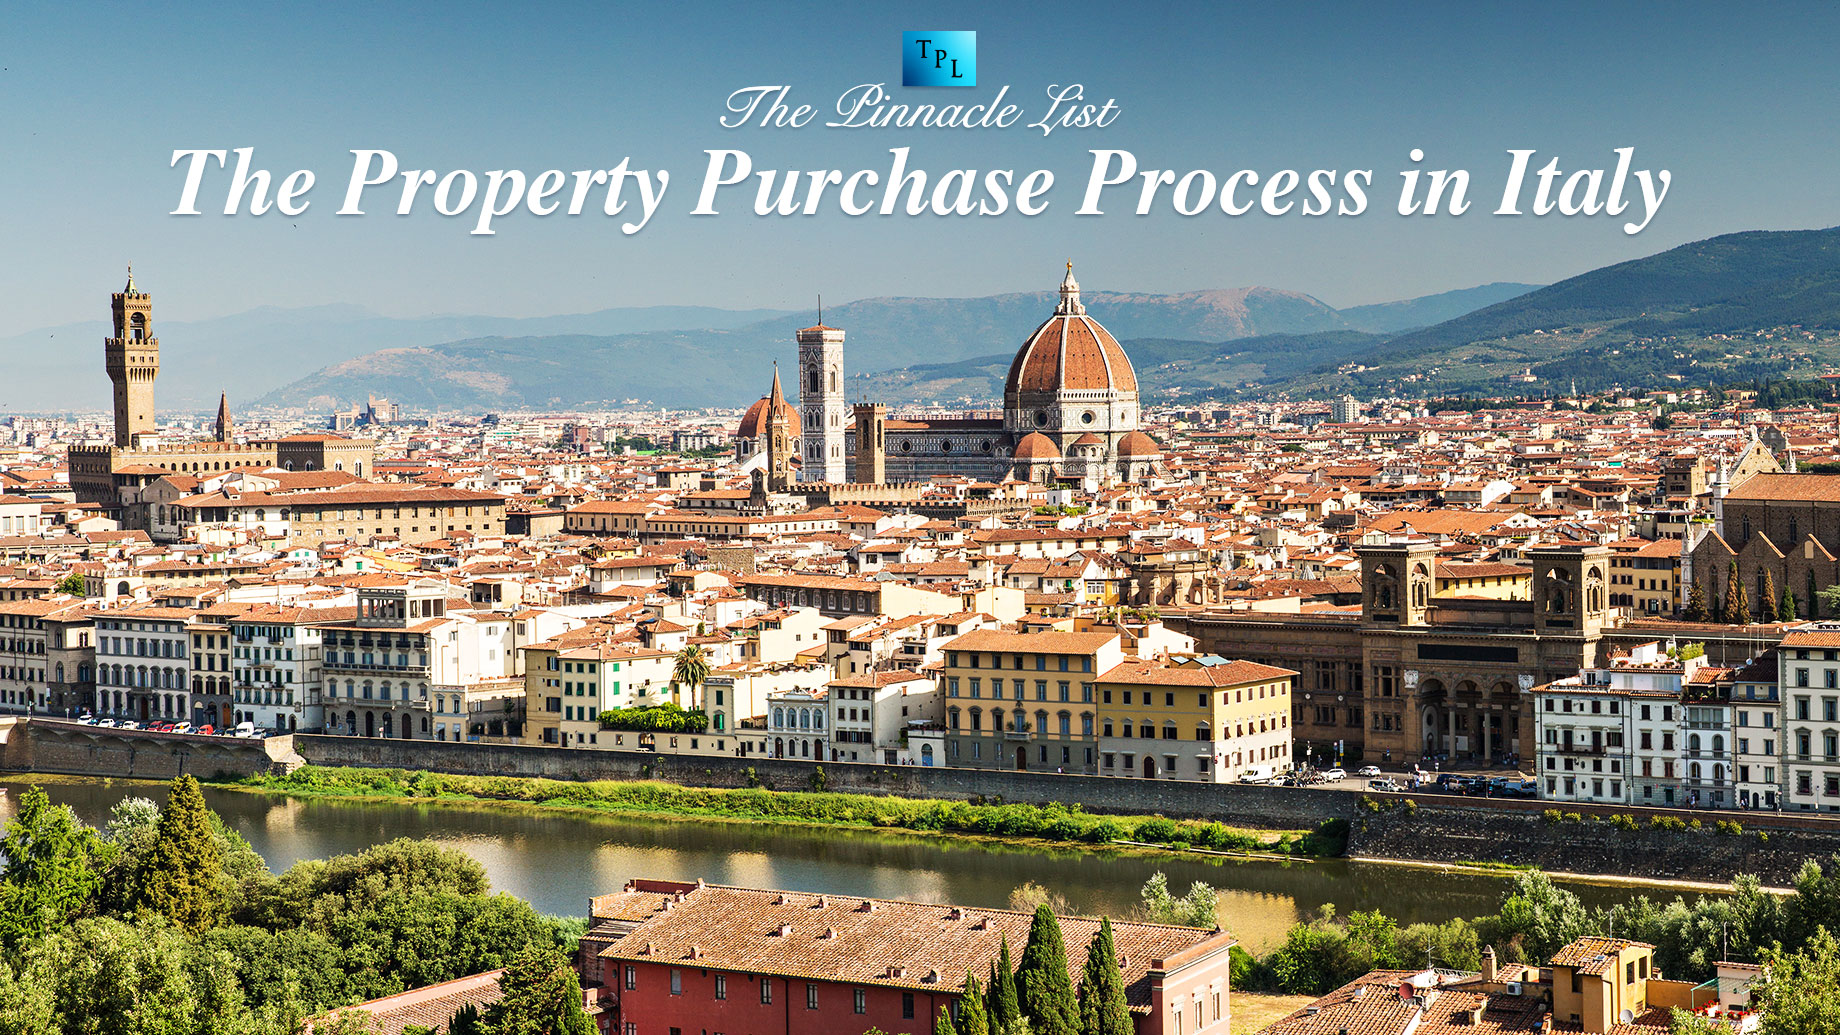 The Property Purchase Process in Italy